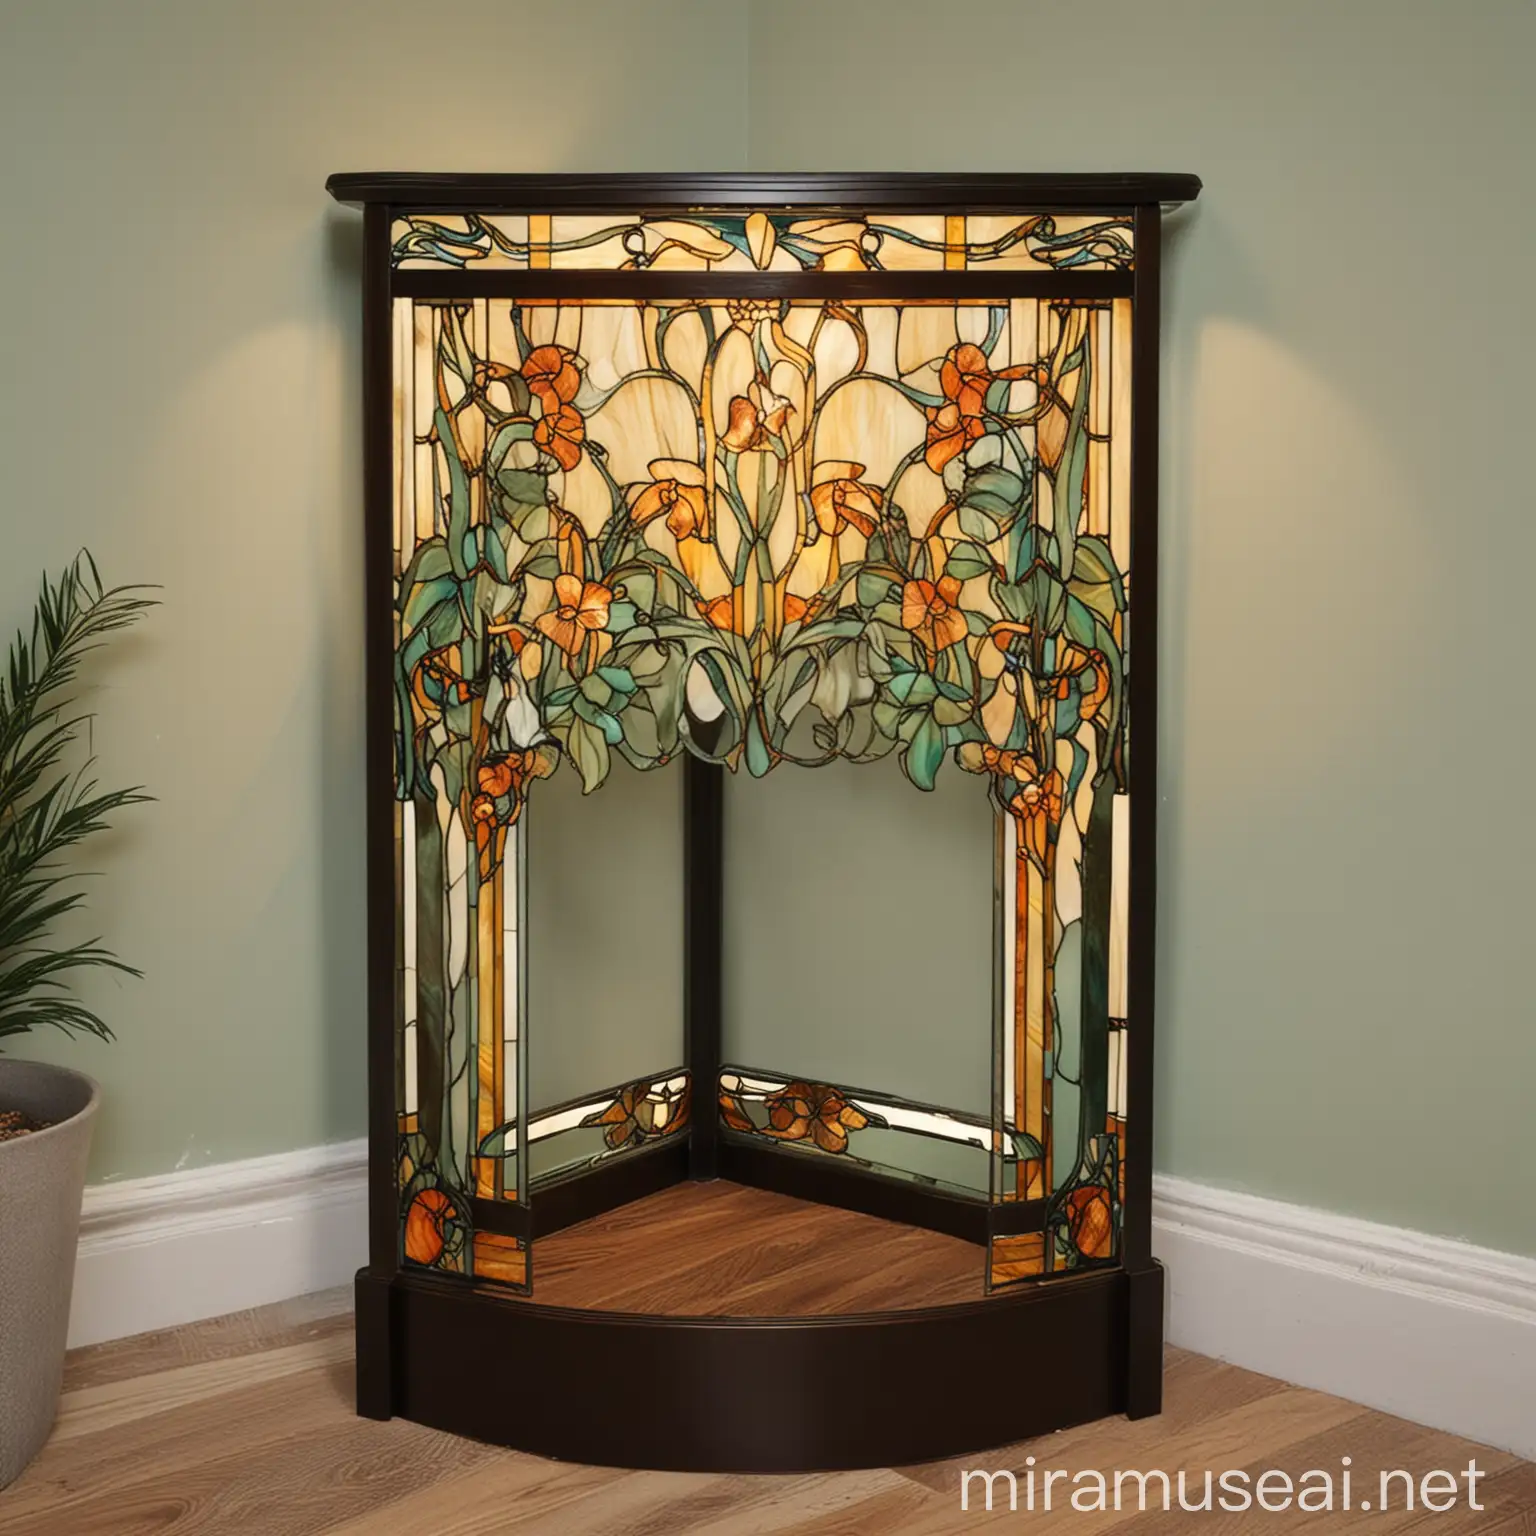 A simple coffee corner unit design inspired by the Art Nouveau style, using Tiffany stained glass